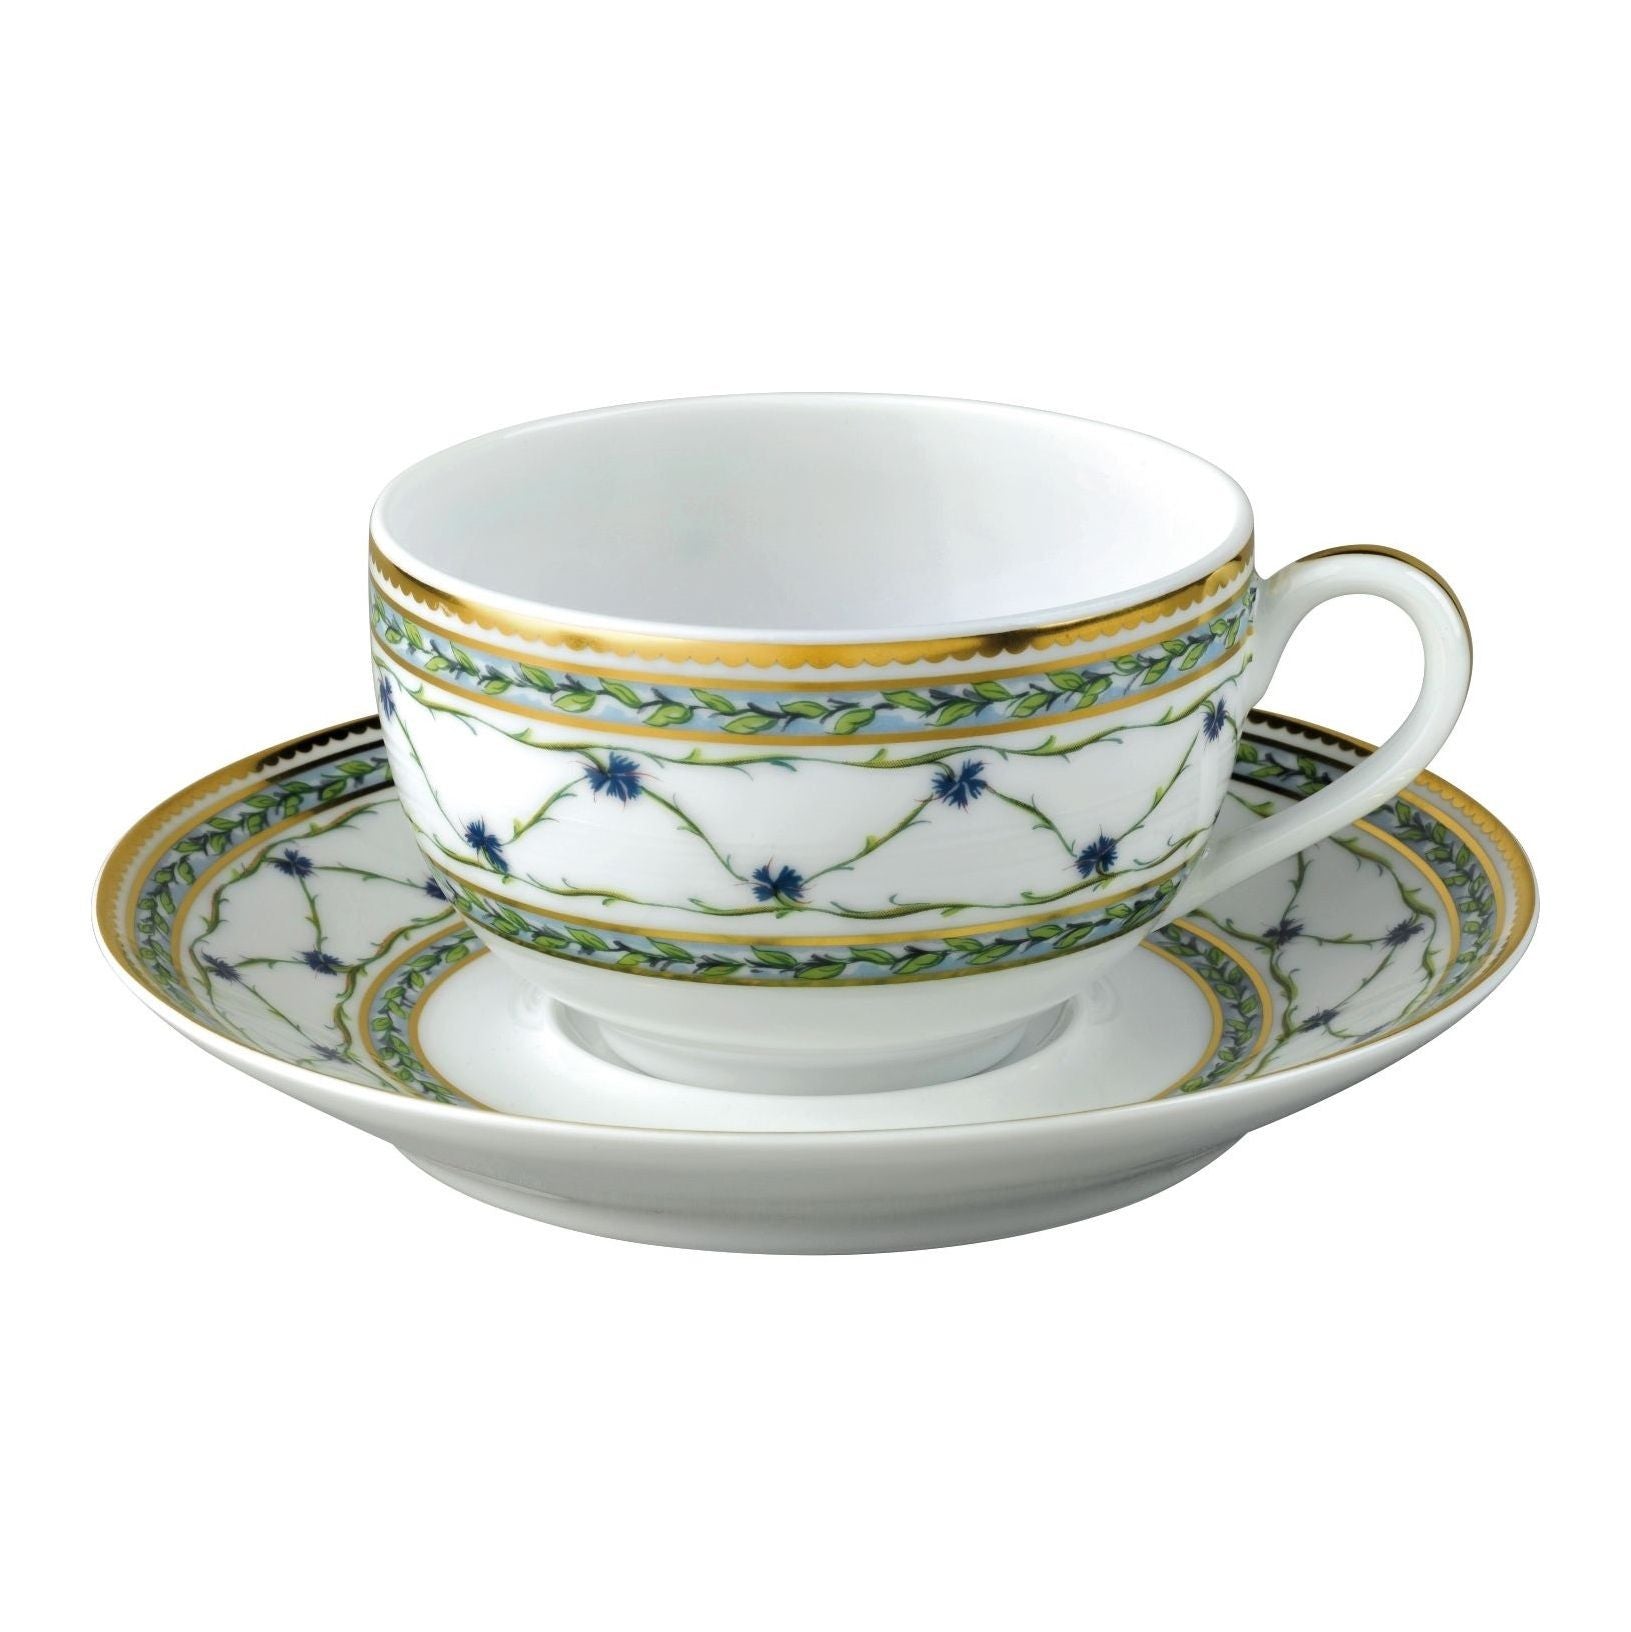 Handpainted cornflowers and greenery are trimmed with 24k gold accents. Fine Limoges porcelain from Raynaud in France. Dishwasher safe.